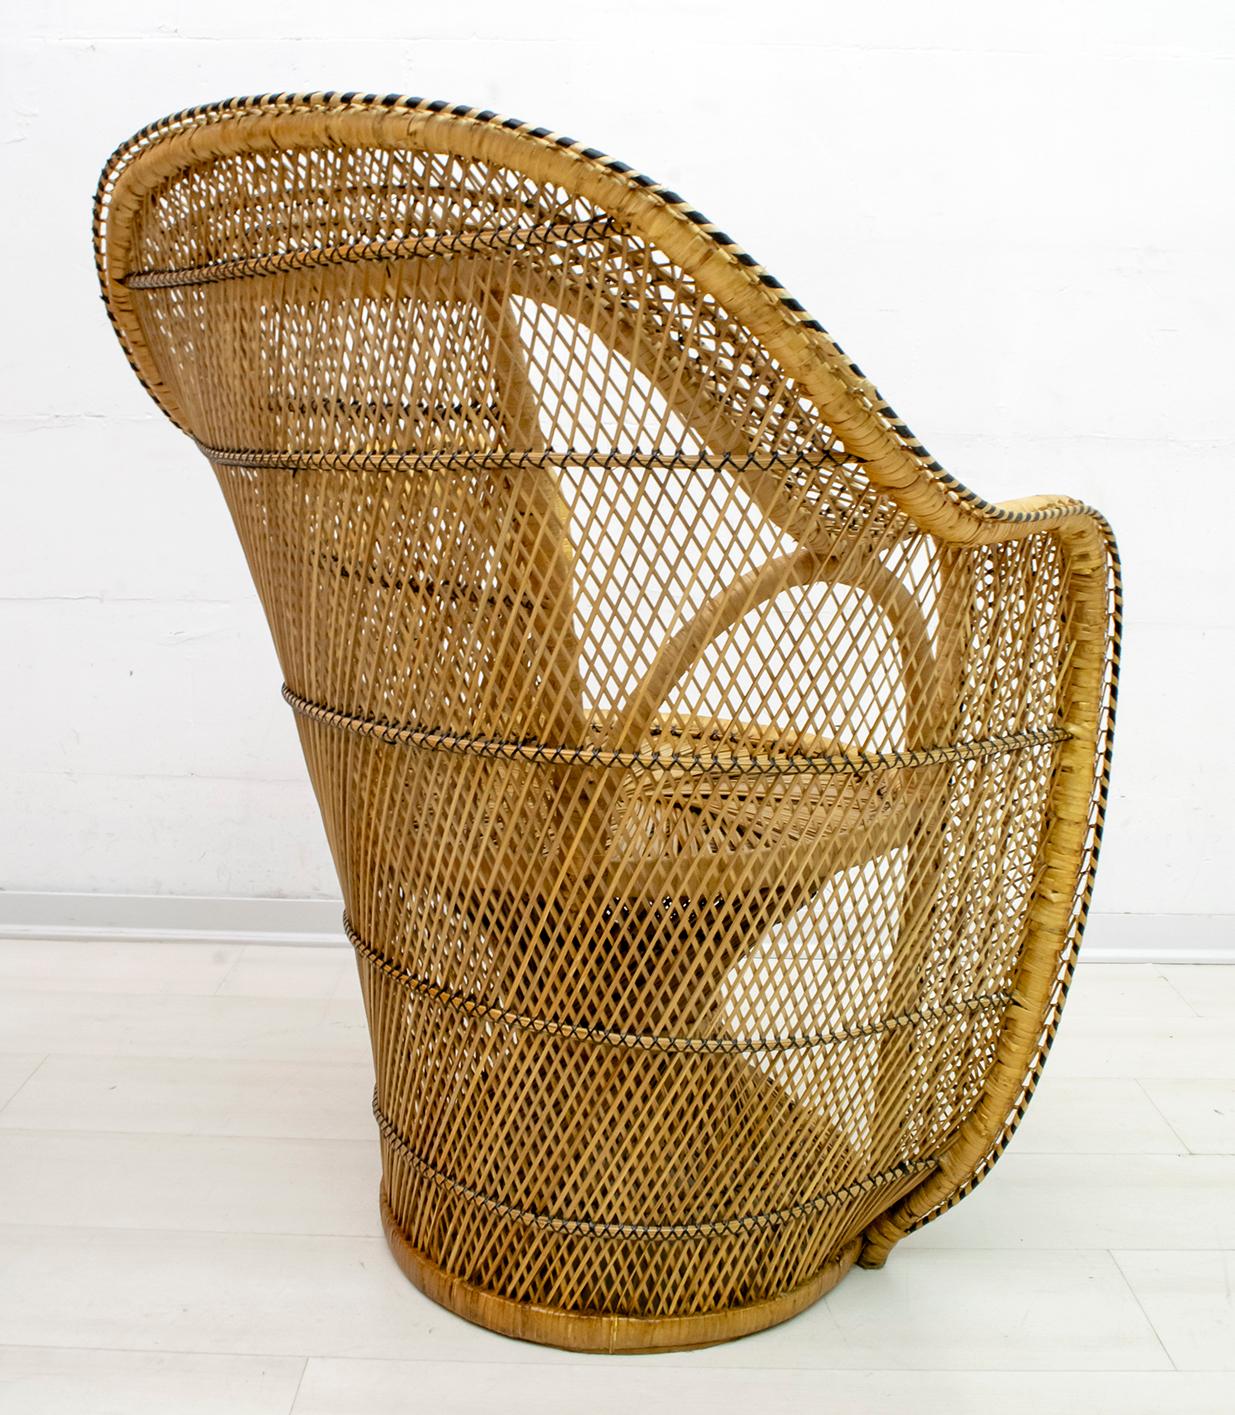 Pair of Mid-Century Modern Wicker Emmanuelle Armchairs from Kok Maison, 1970s For Sale 2